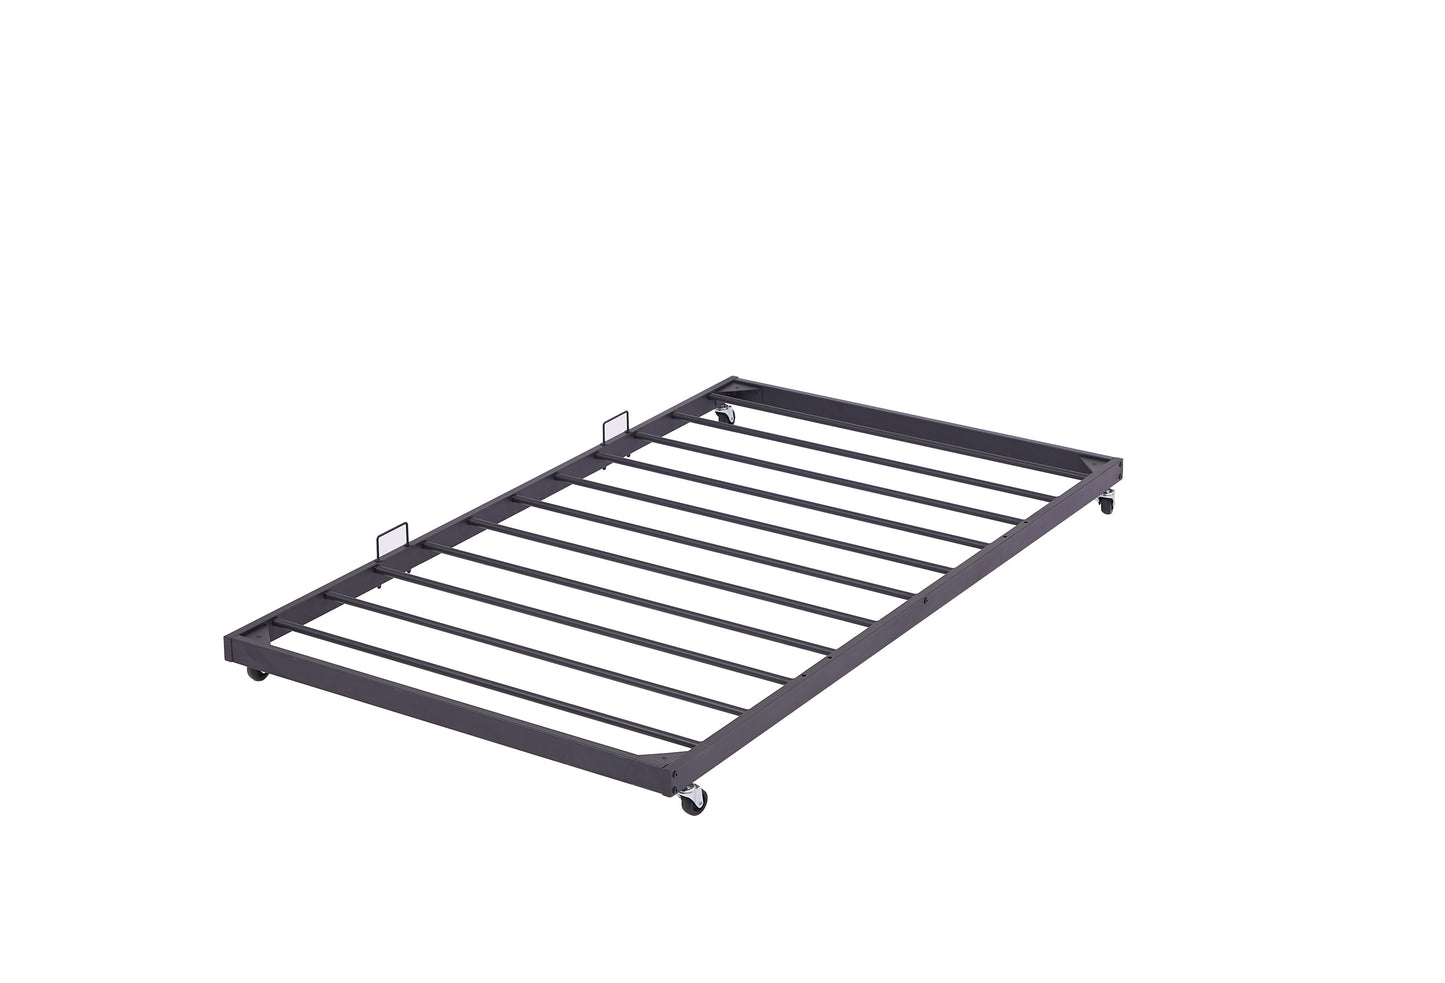 Daybed, sofa bed metal framed with trundle twin size, black, 77''L x 40.6'' W x 14.5'' H